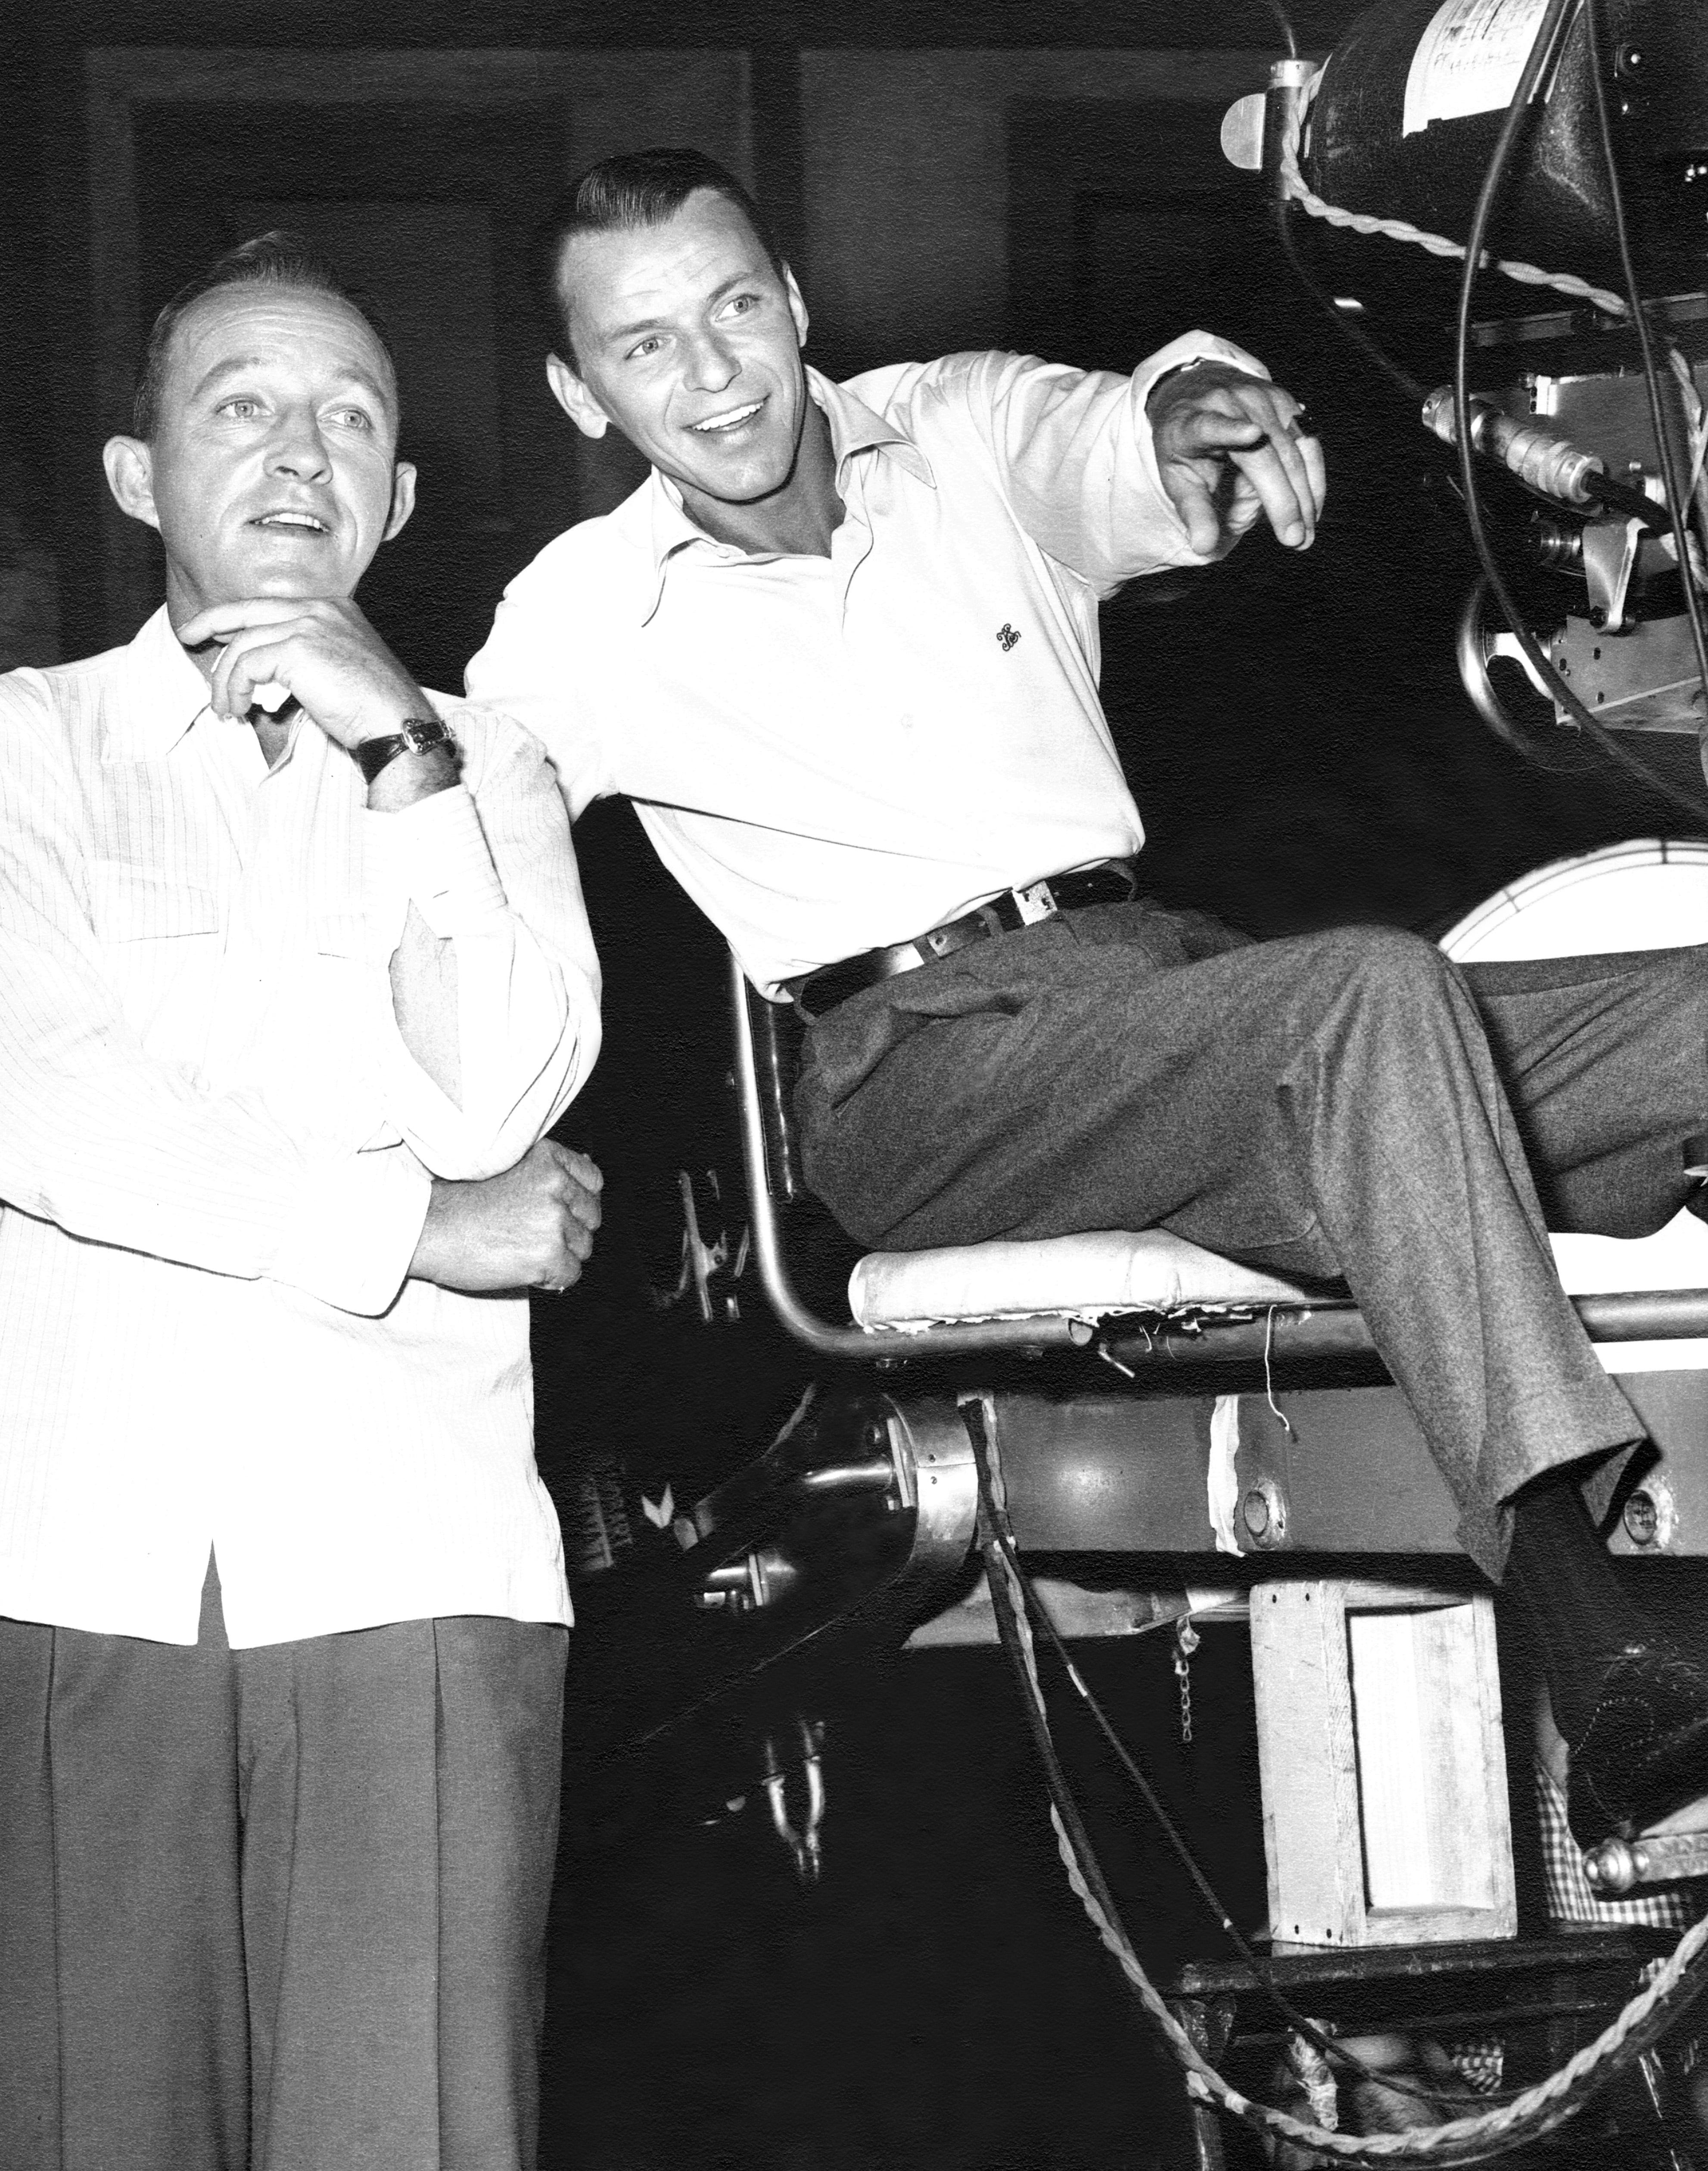 Bing Crosby and Frank Sinatra swing into Christmas in the 1957 special "Happy Holidays With Bing and Frank."